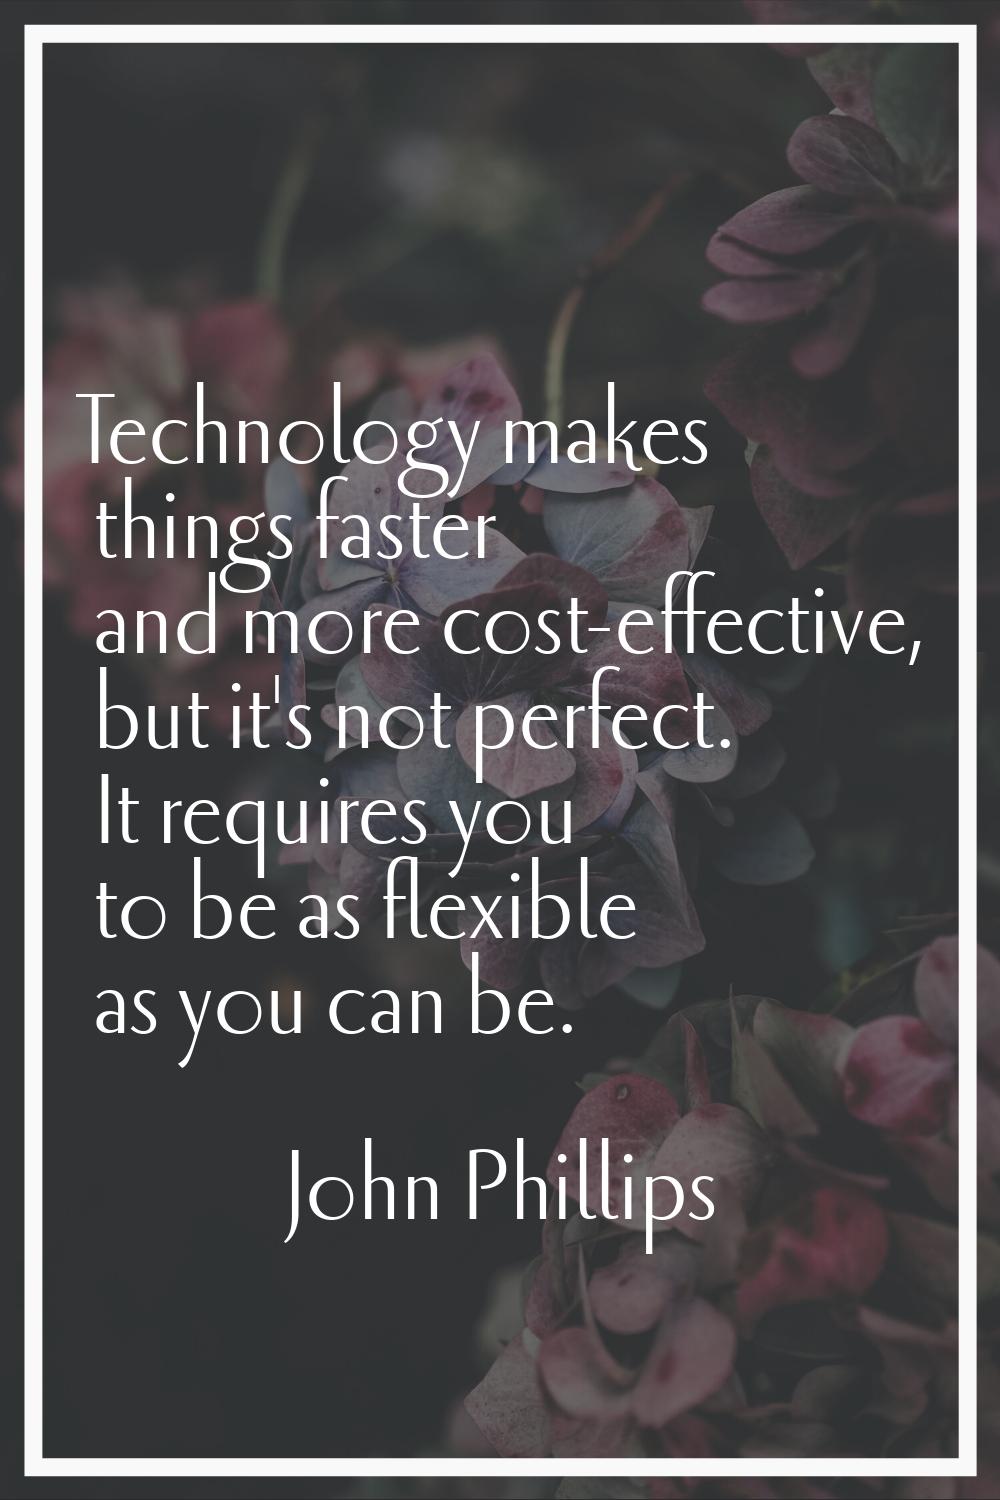 Technology makes things faster and more cost-effective, but it's not perfect. It requires you to be